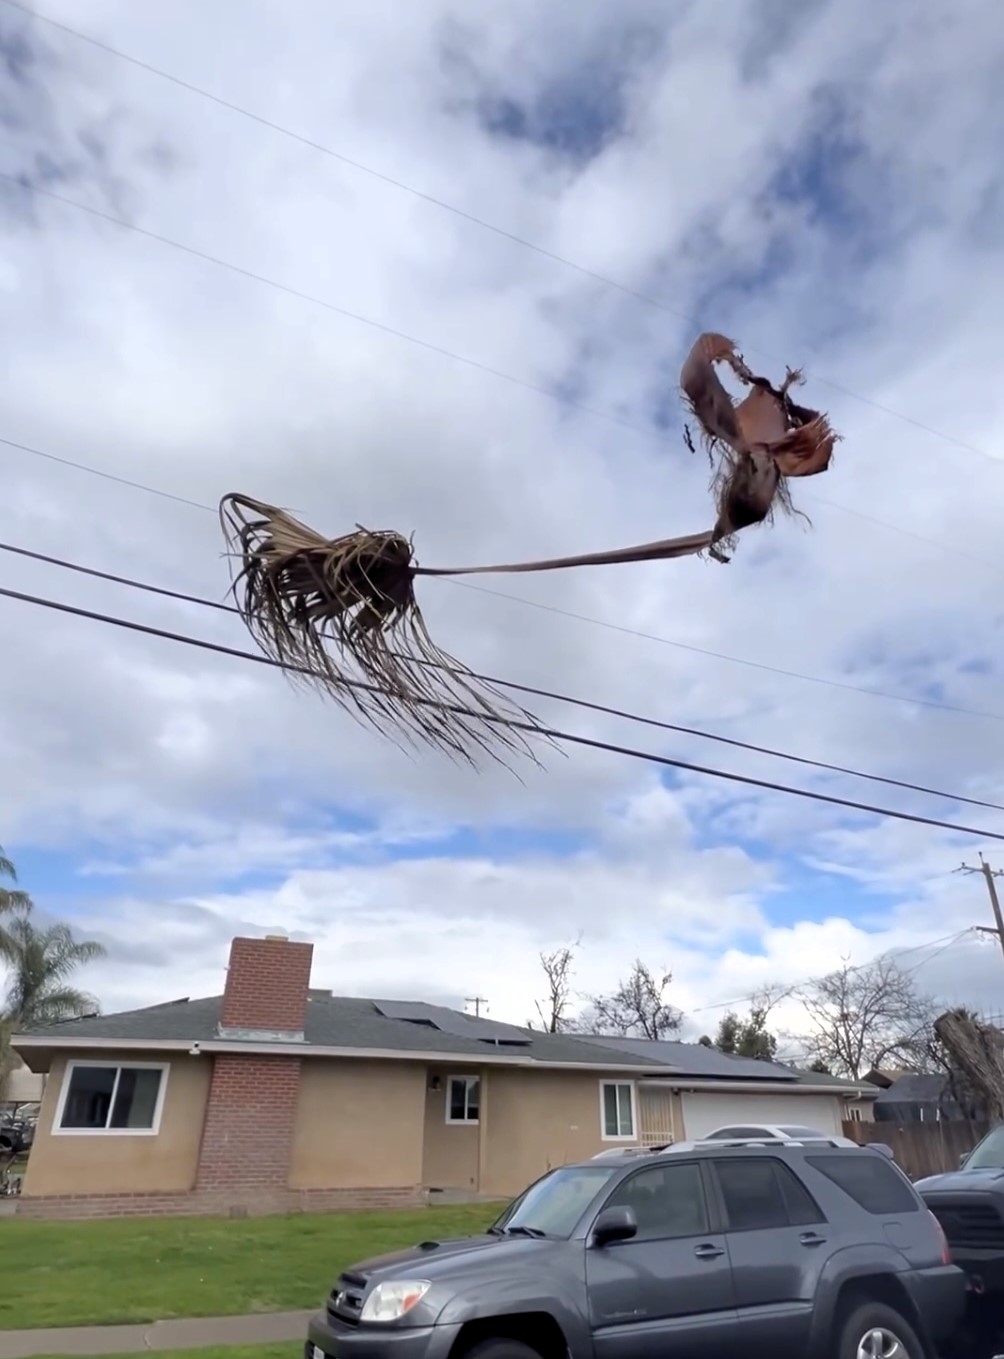 Social media users are amazed by a 'floating' palm tree branch in Fresno, California, likening it to a Hogwarts broomstick. Luis Chavez's viral video sparks jokes about finding a new route to the fictional school.